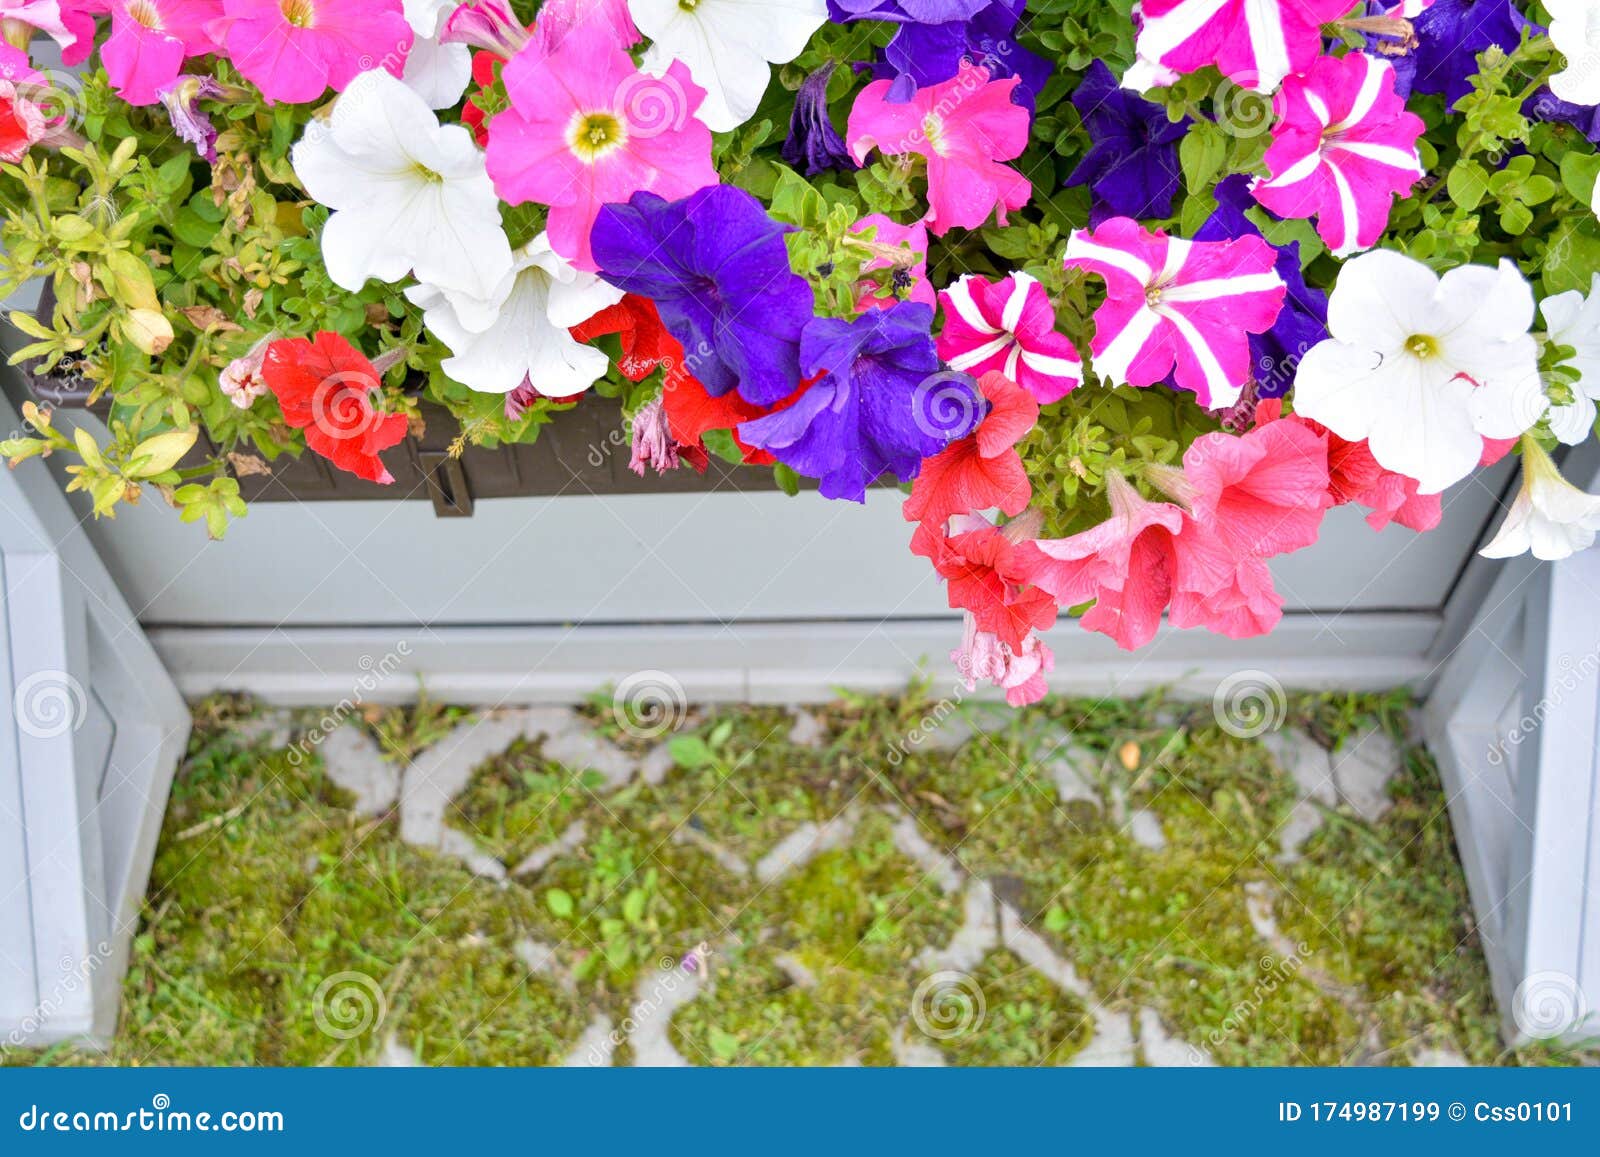 Petunia Colorful Flowers In White Wooden Crate On Eco Pavement In Summer Garden Stock Image Image Of Blossom Gardening 174987199